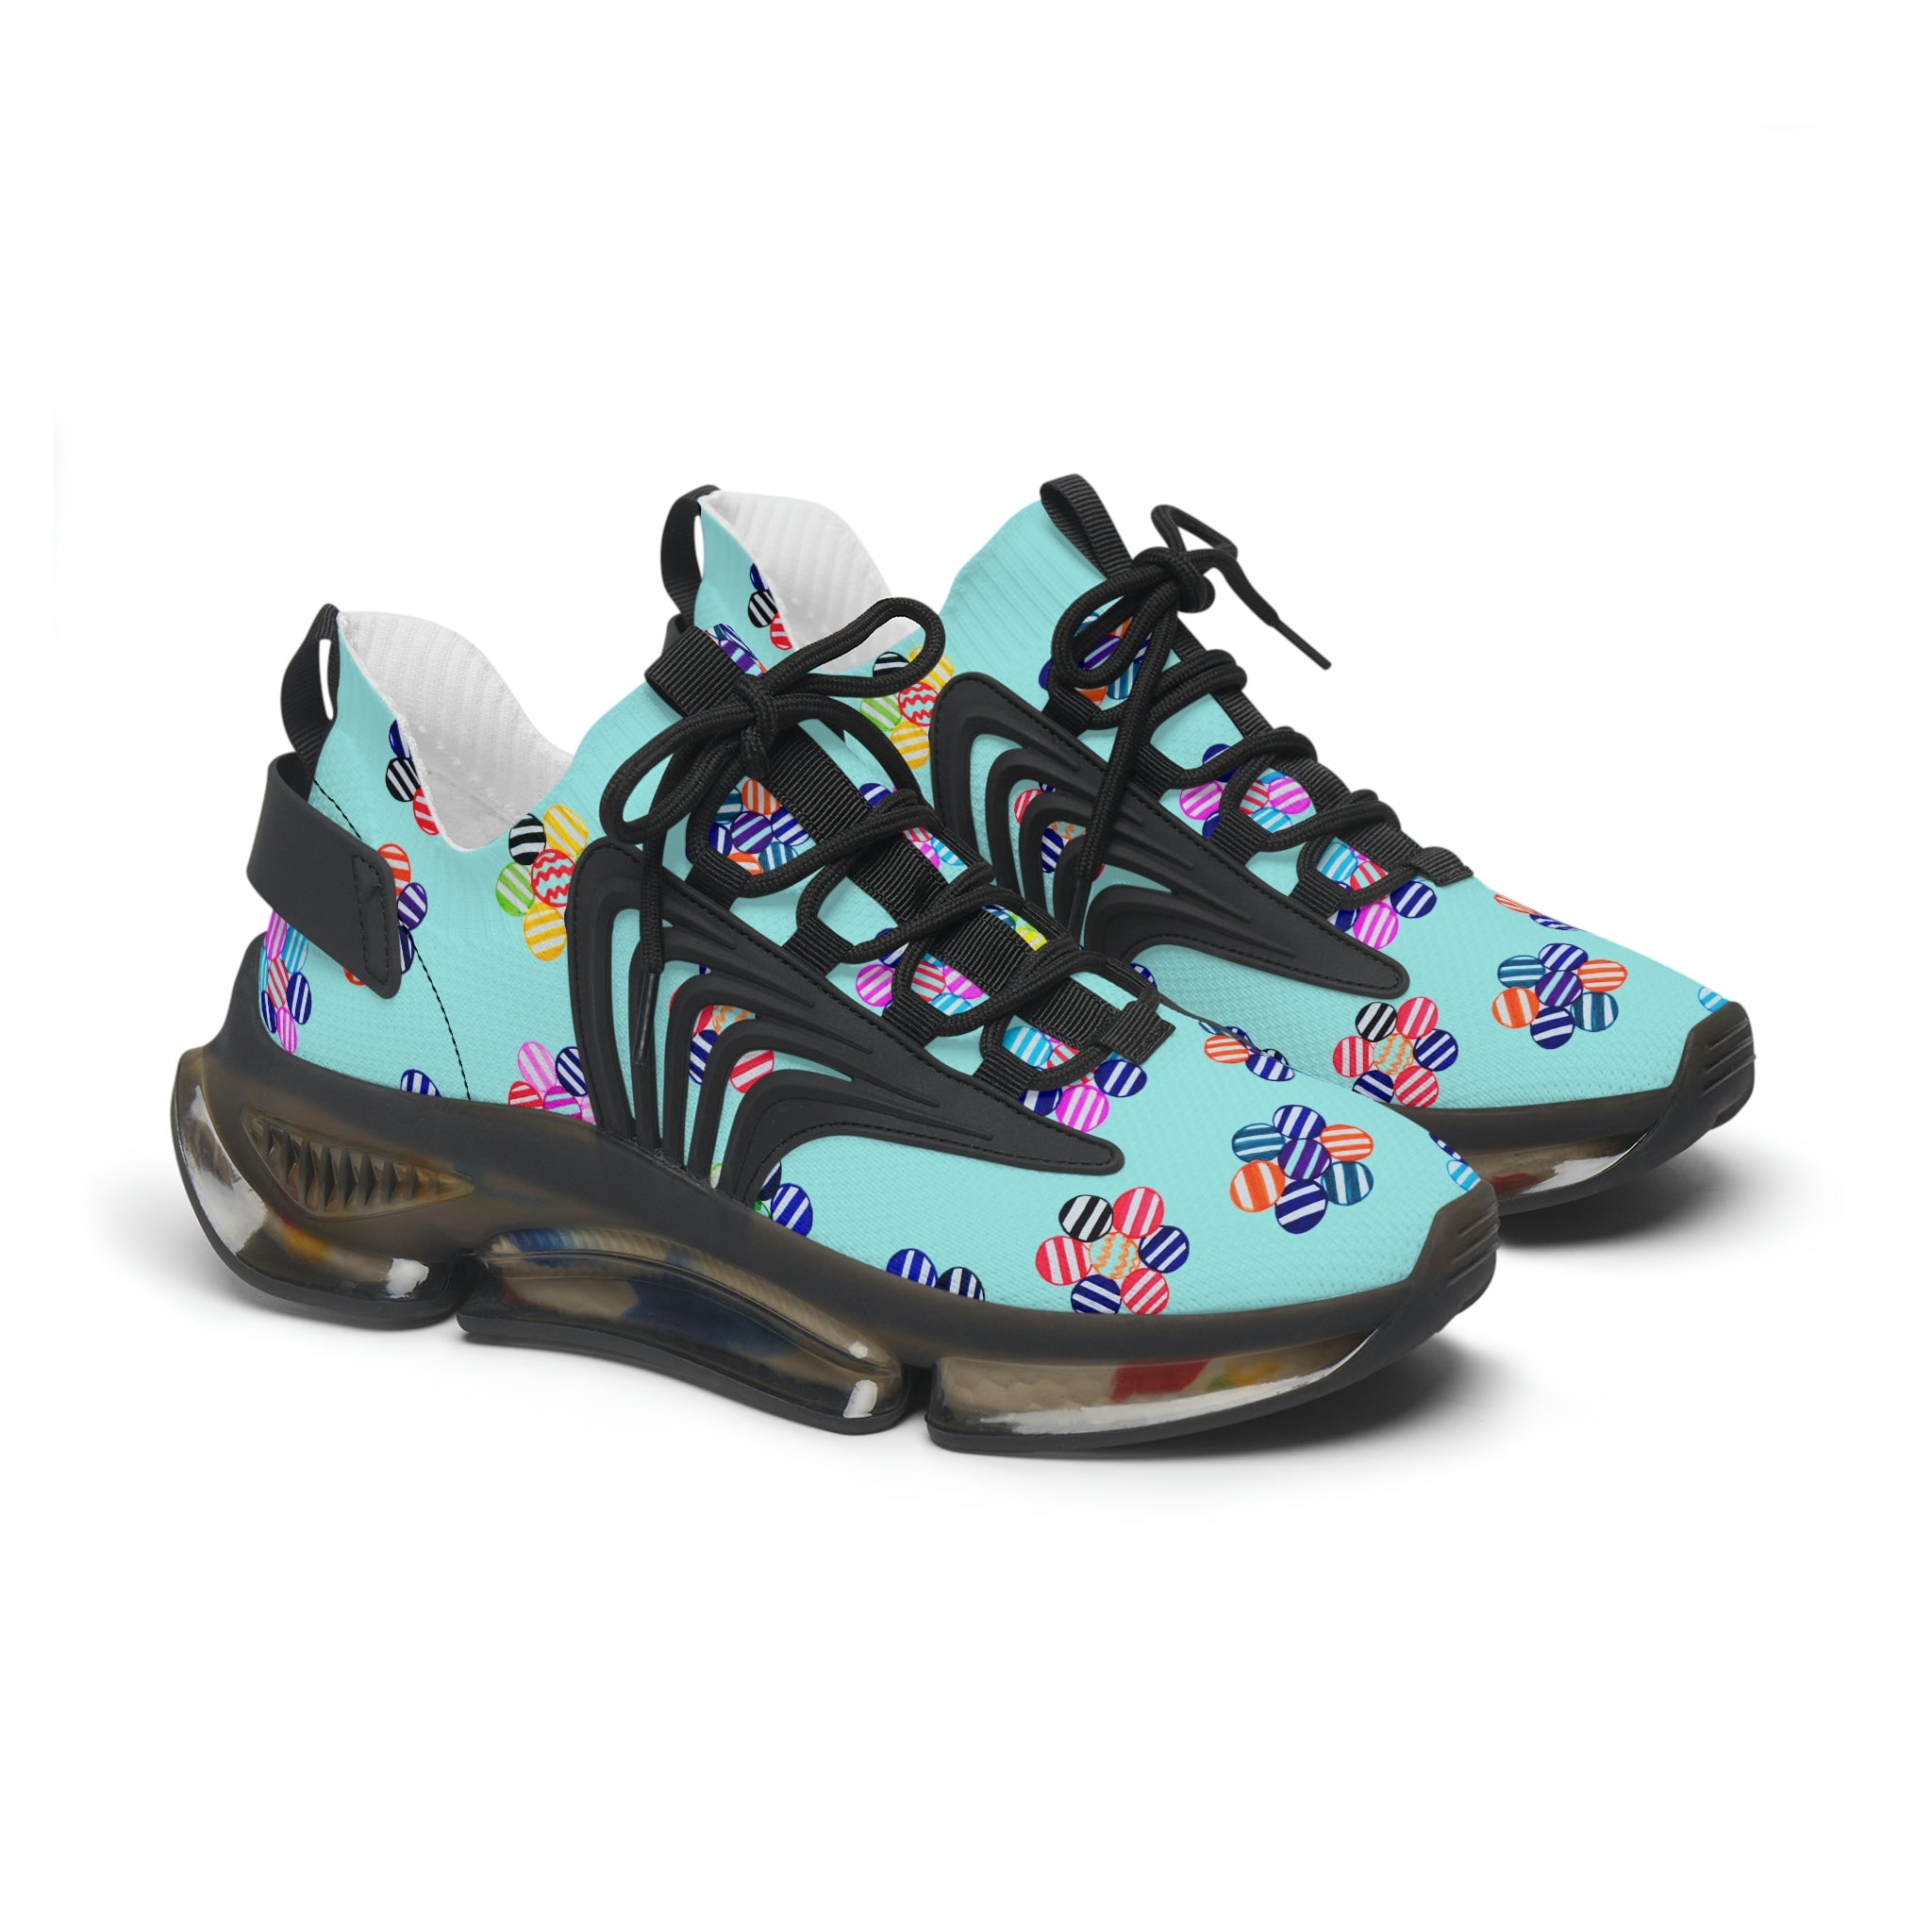 Icy Blue Candy Floral Printed OTT Women's Mesh Knit Sneakers